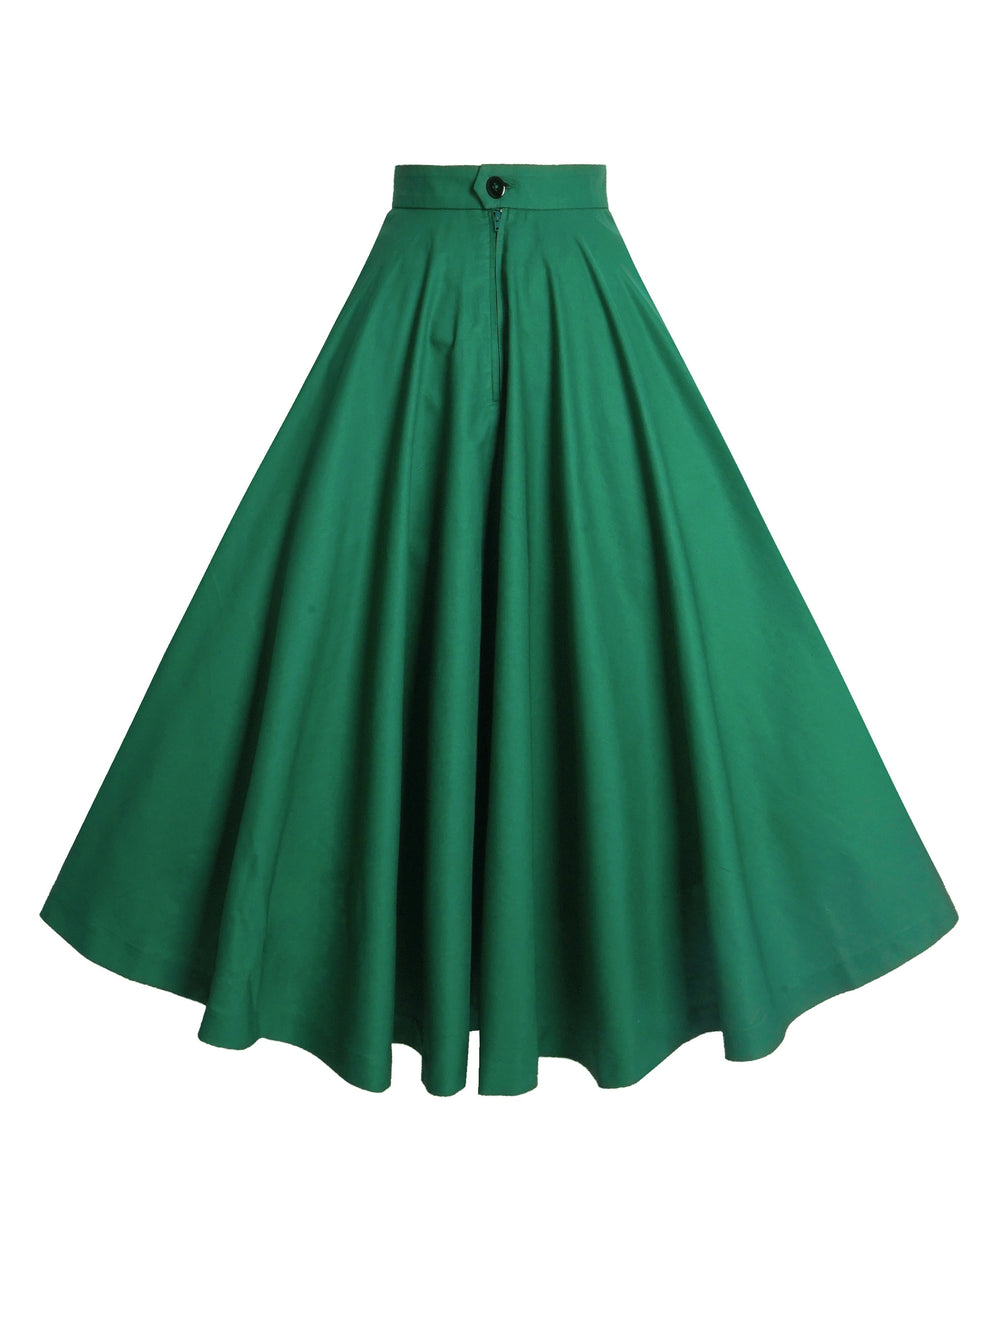 MTO - Lindy Skirt in Pine Green Cotton